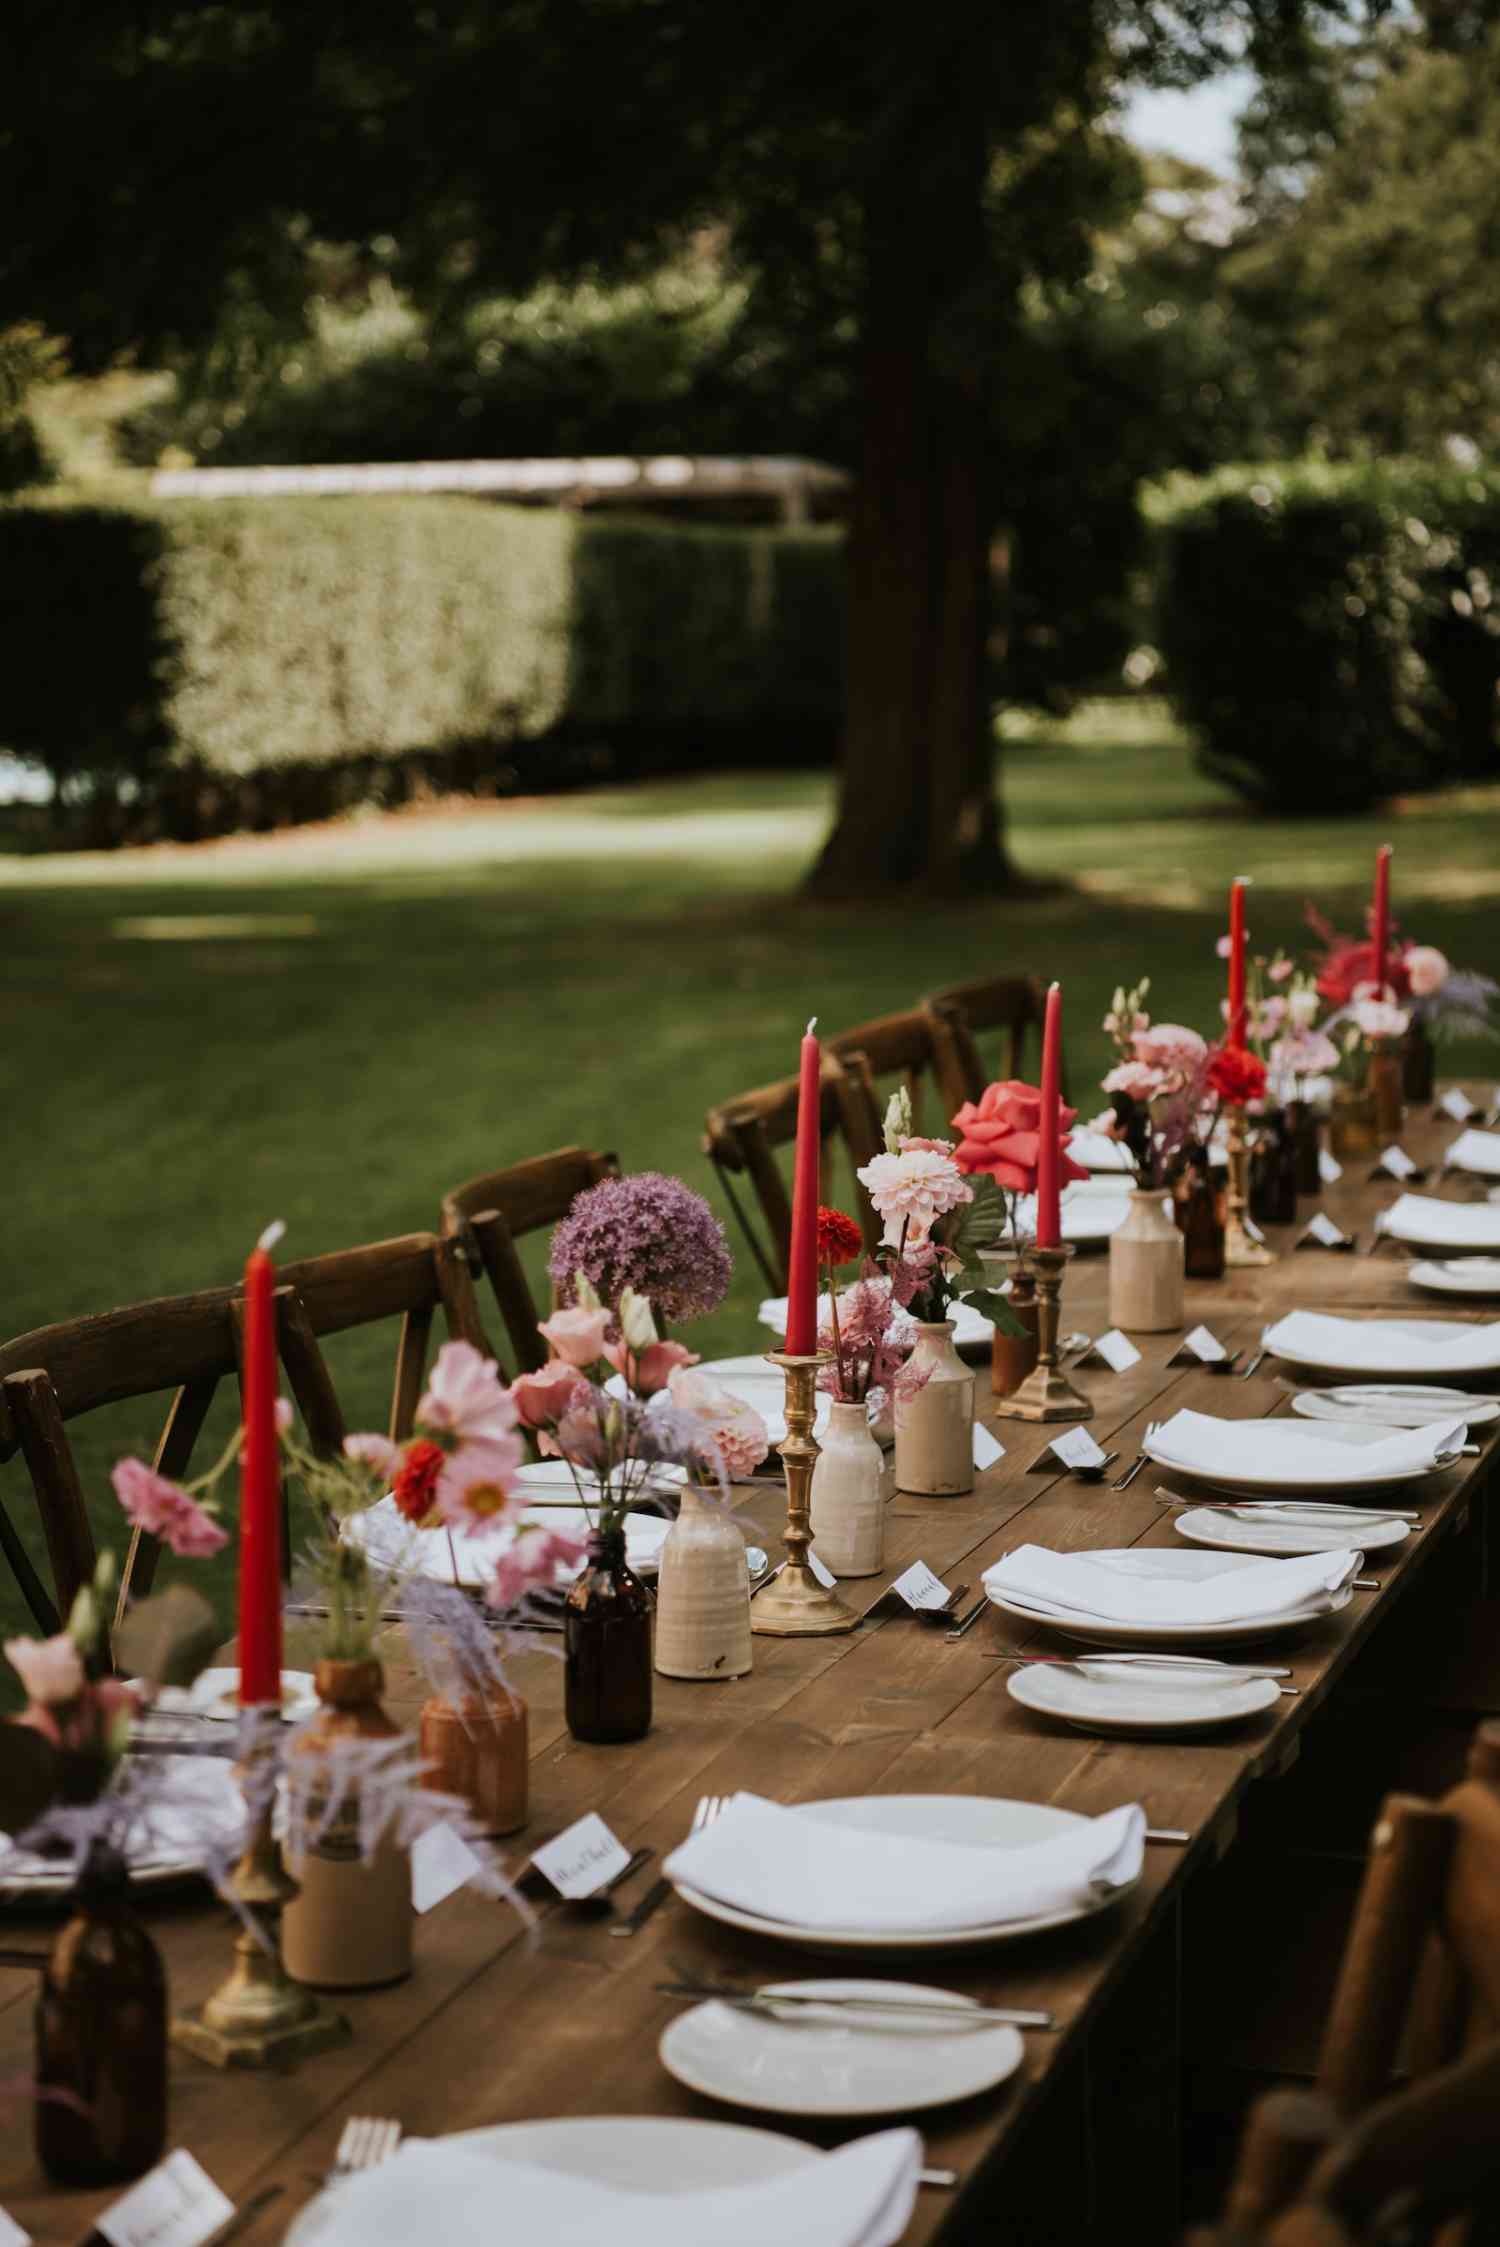 Vibrant Meadow Table Decorations